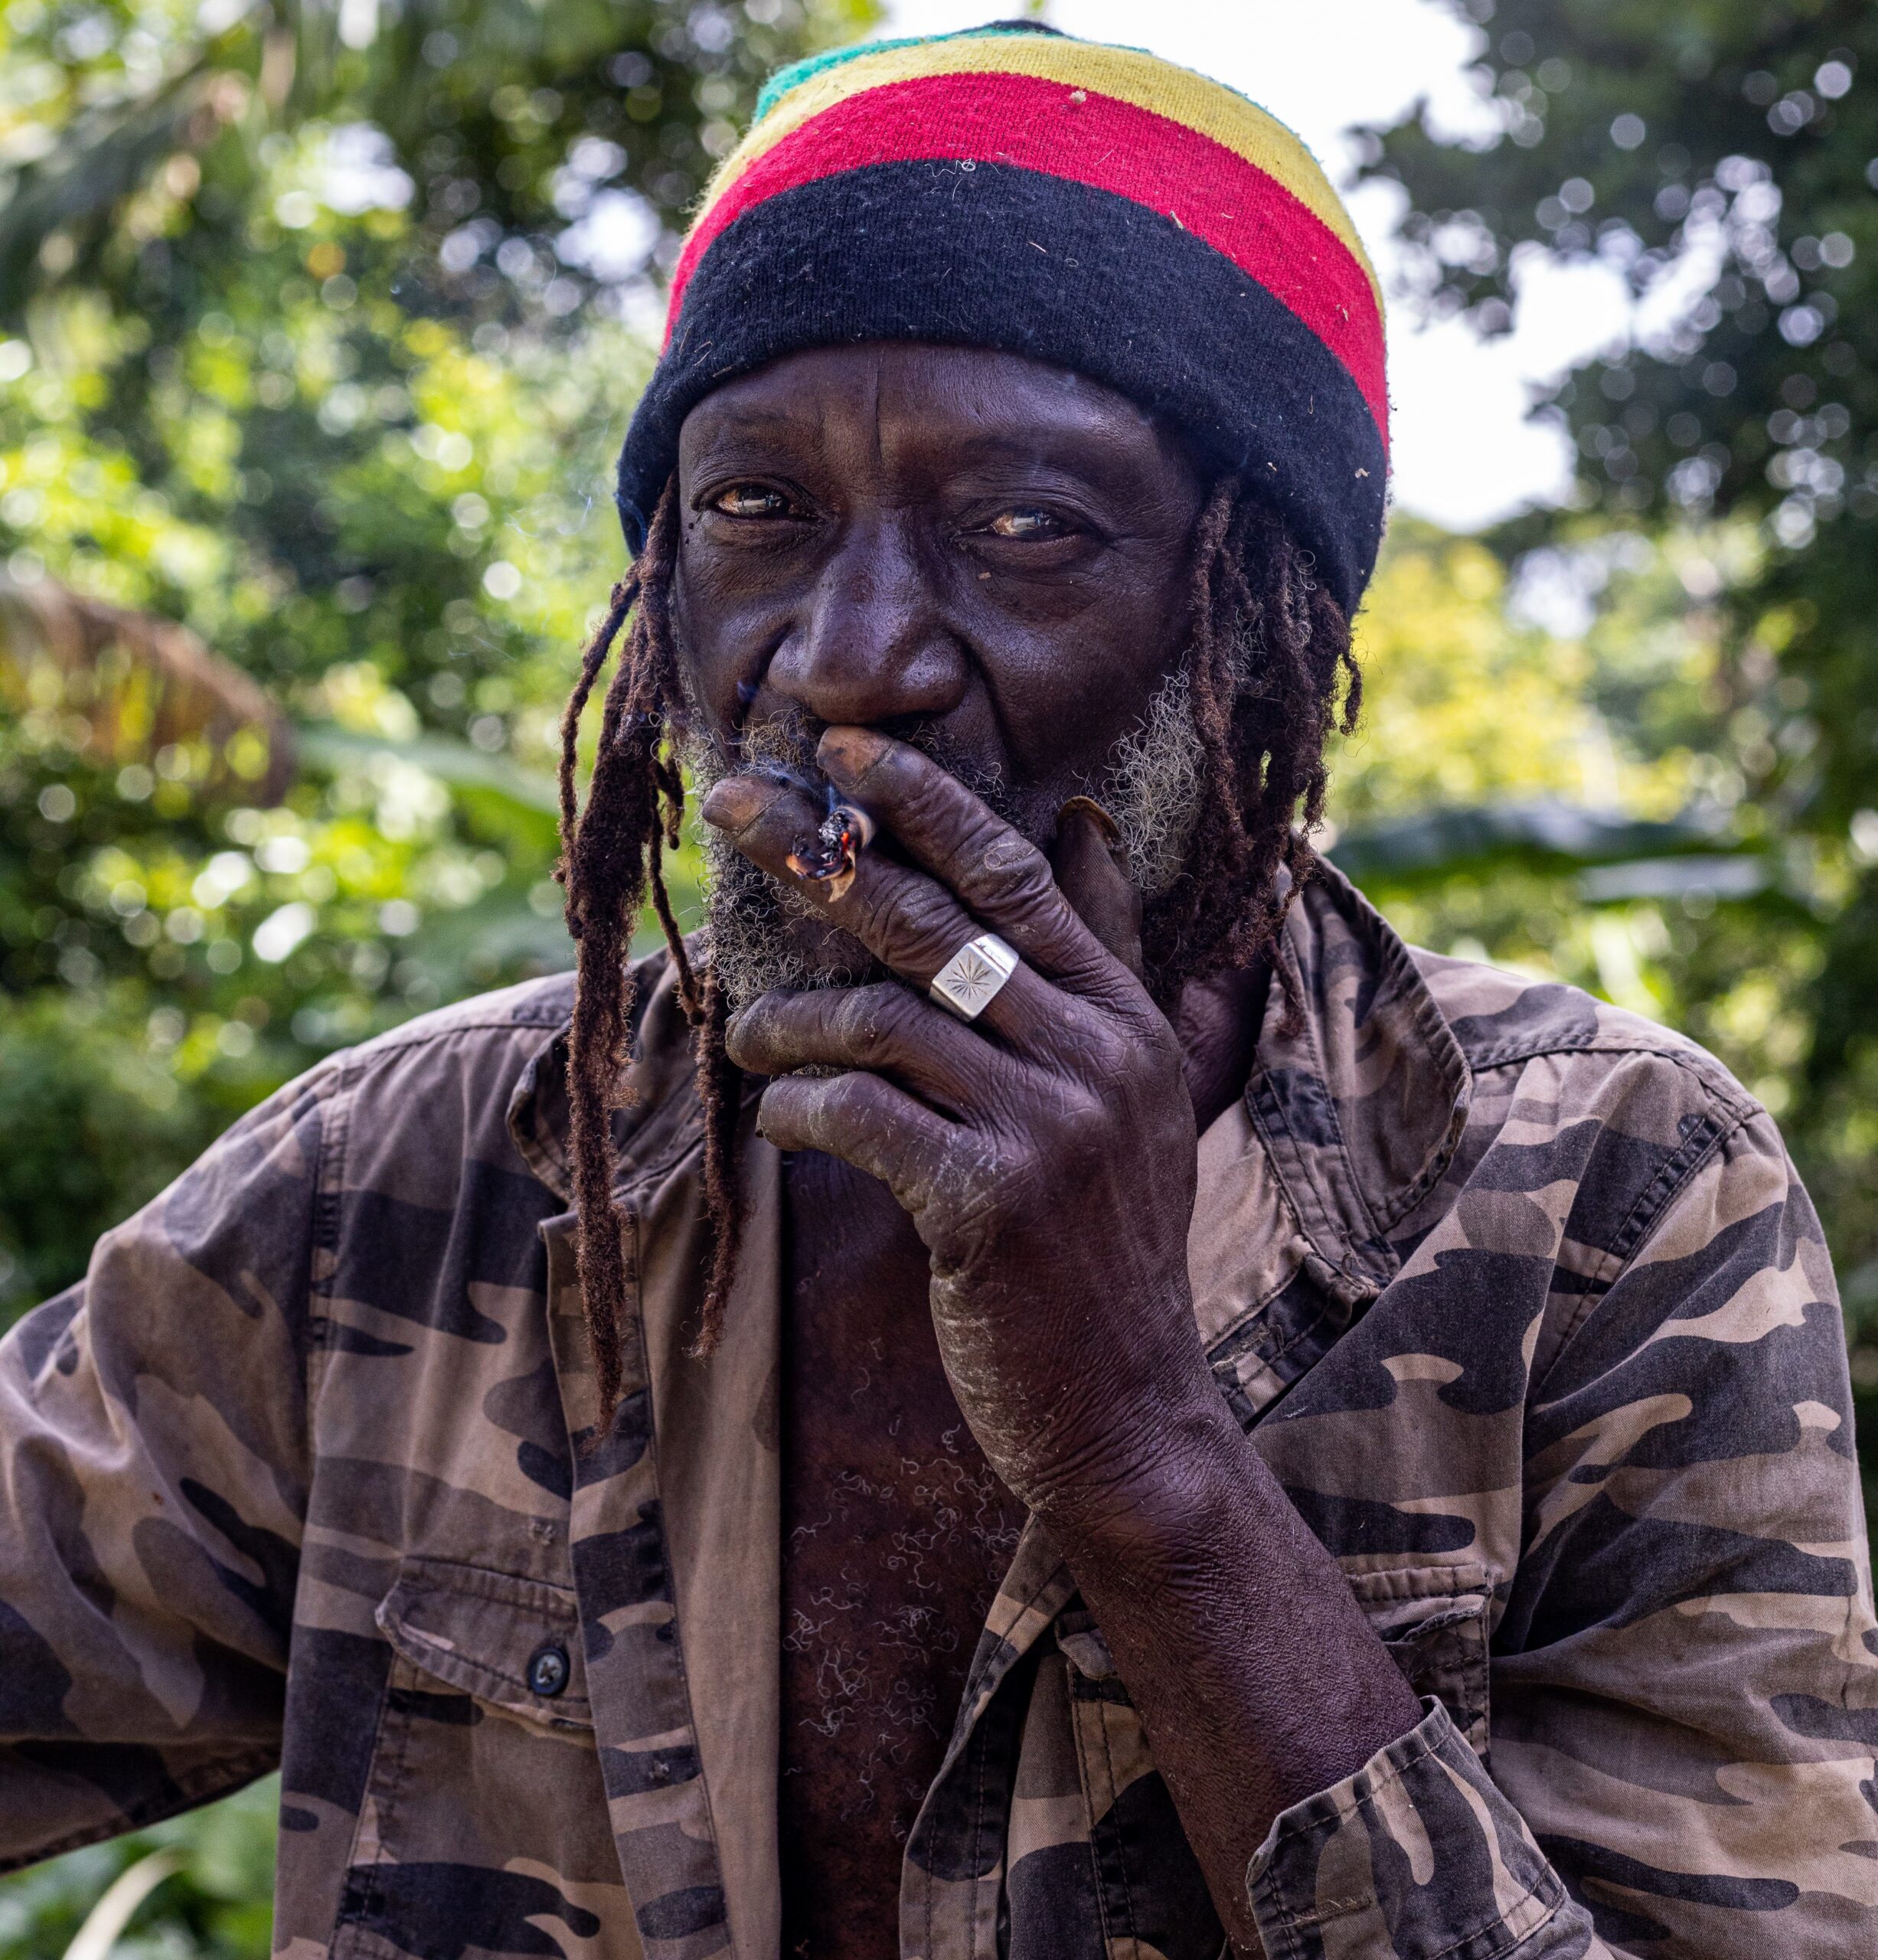 Revel Inna Livity! 3 Things You Should Know About This Rastafarian Philosophy